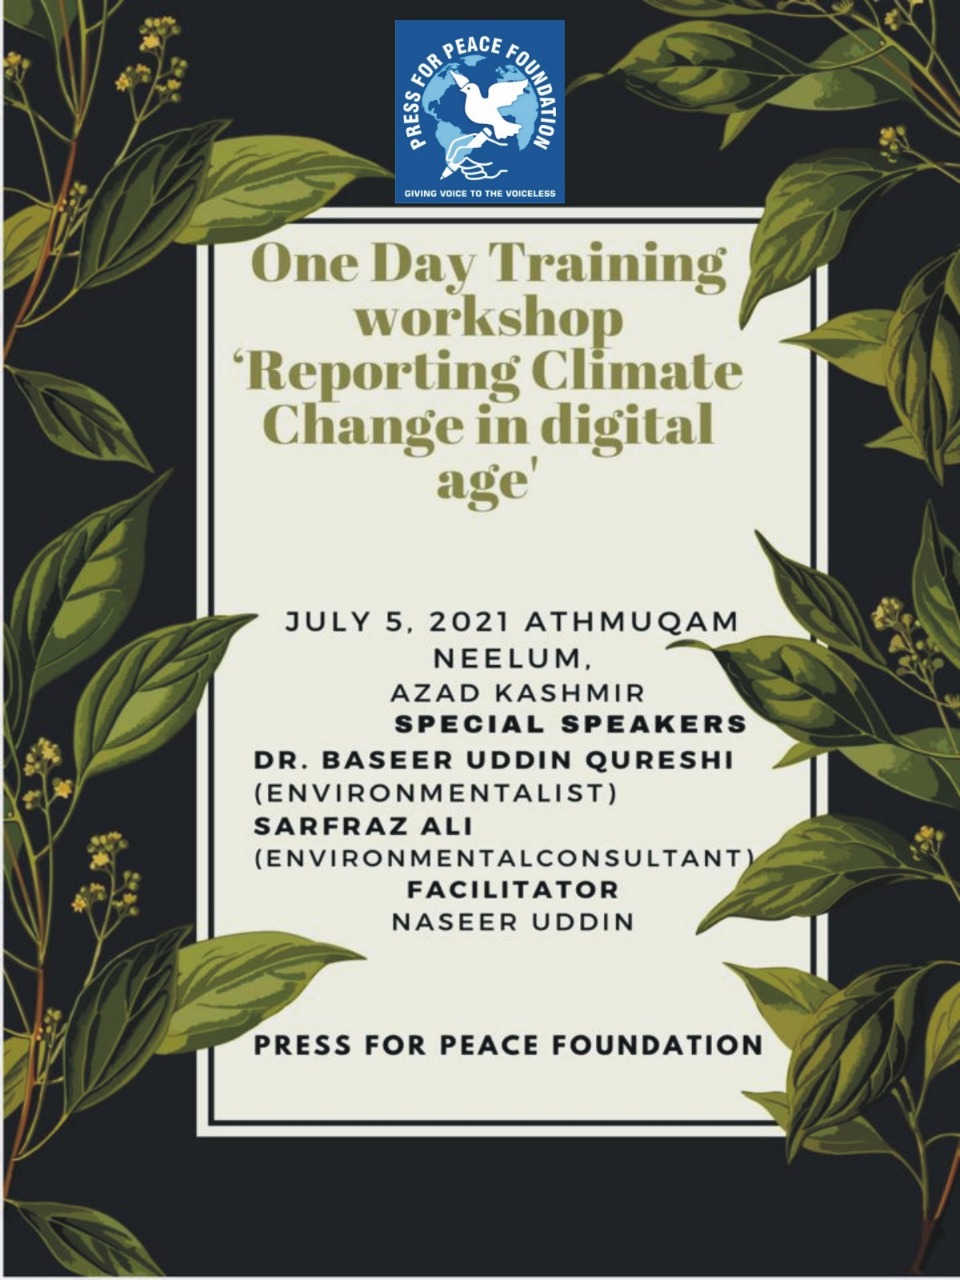 Press for Peace Foundation organises workshop on “Reporting Climate Change in Digital Age”